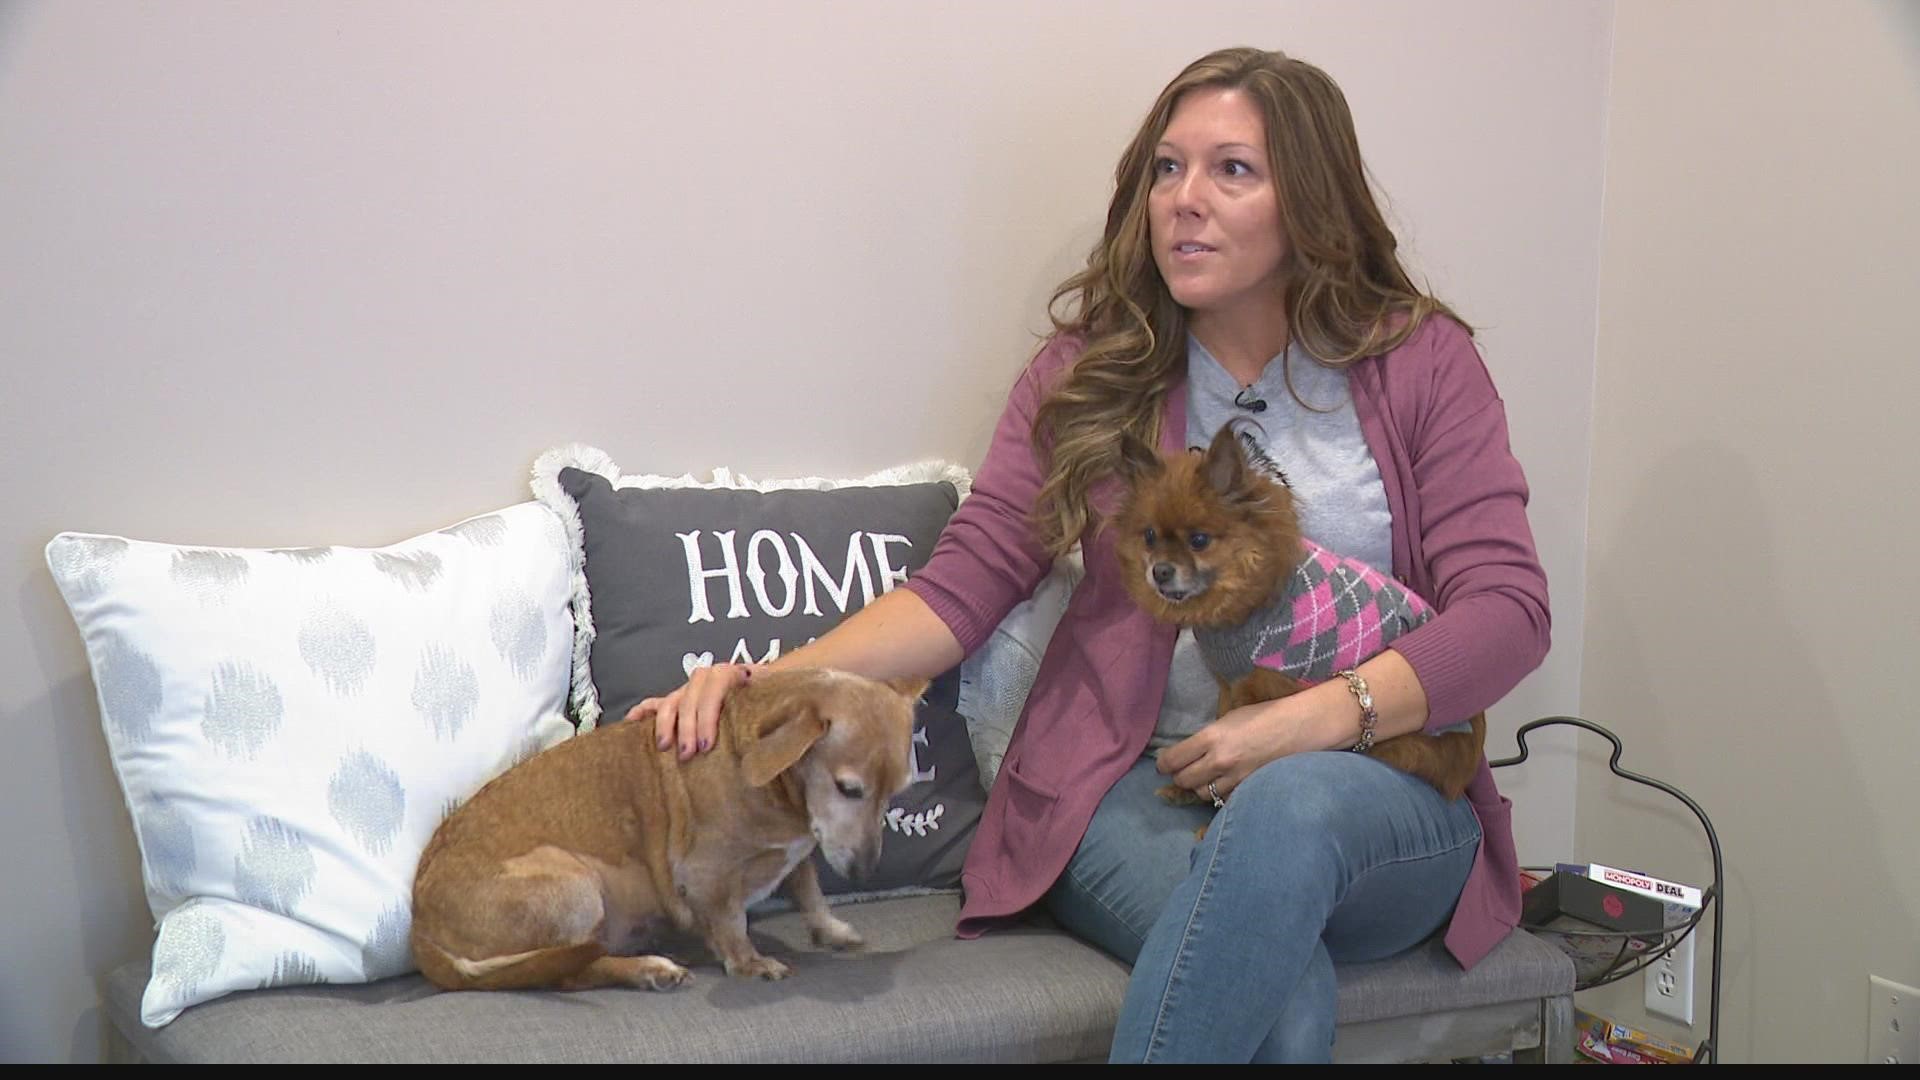 Viral Pitbull mom tells about the importance of fostering dogs